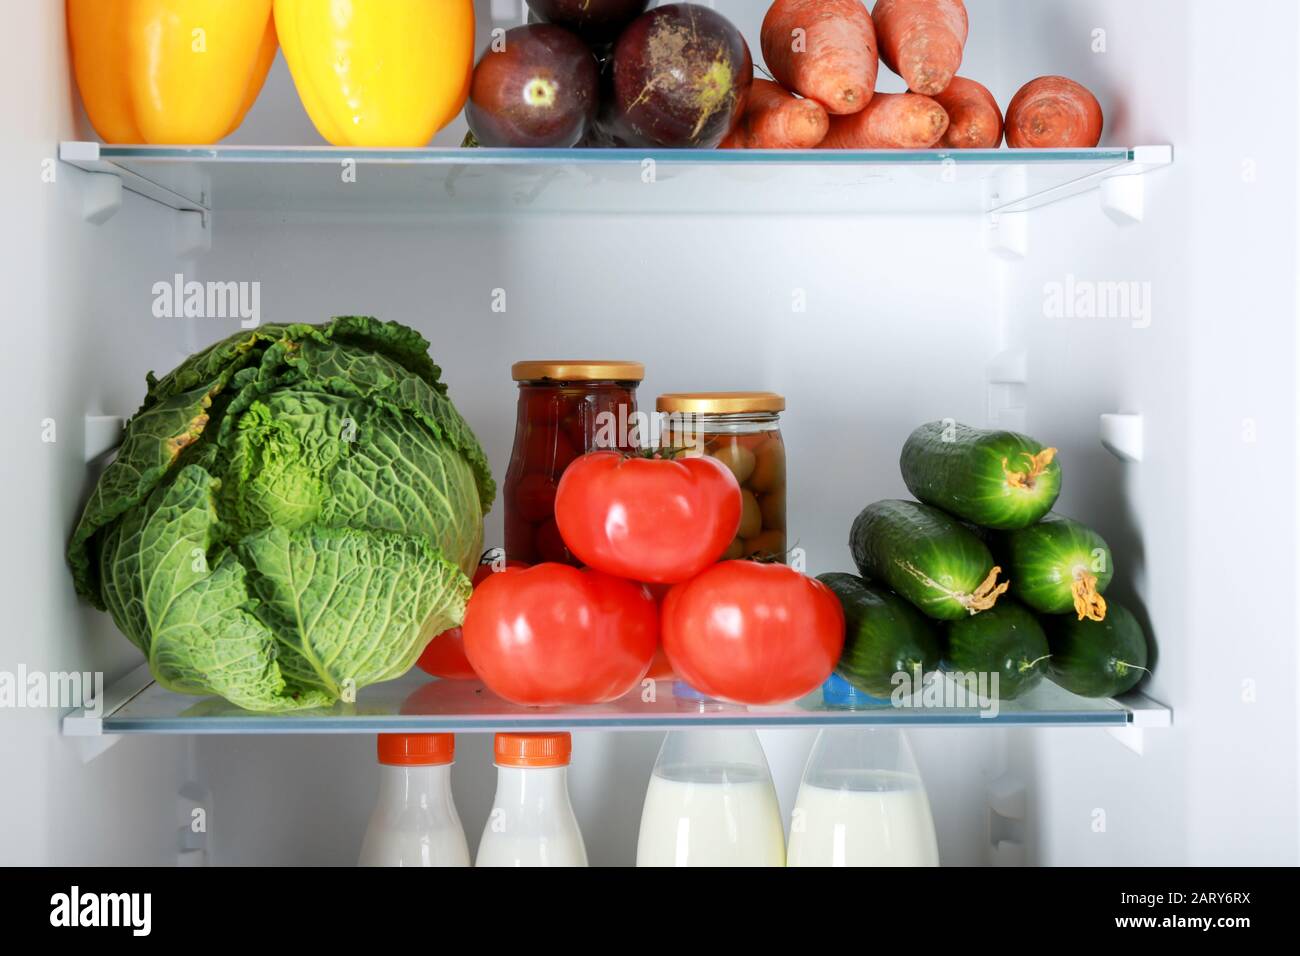 Different products on shelves in fridge Stock Photo